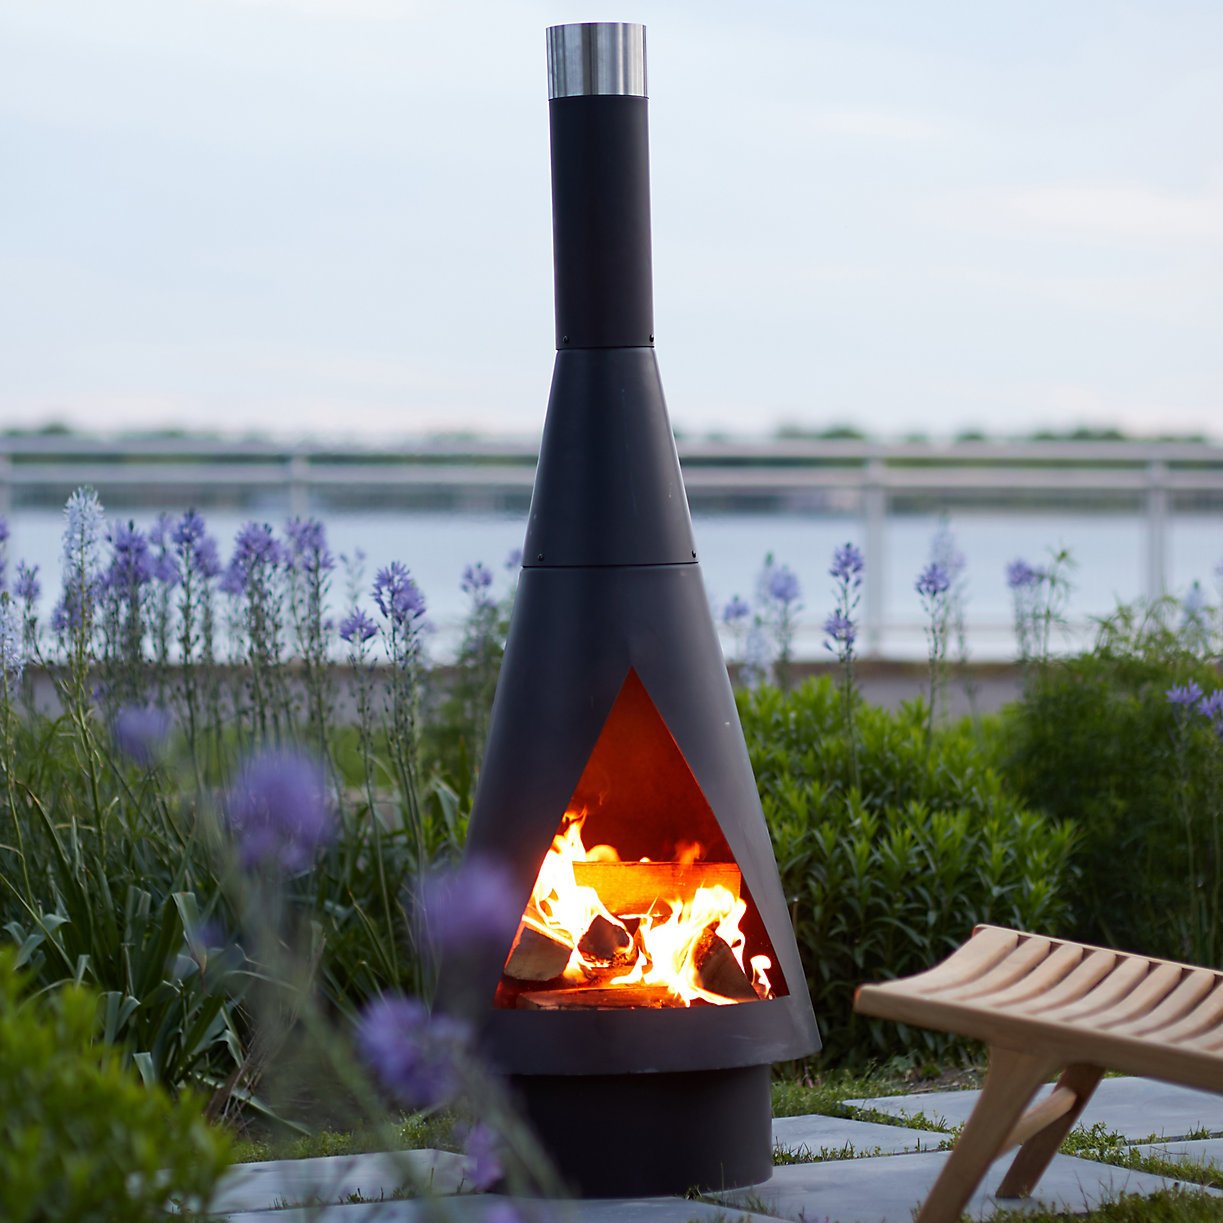 Terrain Angled Obelisk Chiminea - Go up with this elevated, geometric chiminea. Welded from a single piece of weathering steel, this timeless wood-burning outdoor fireplace will develop a beautiful patina over time. SHOP NOW >